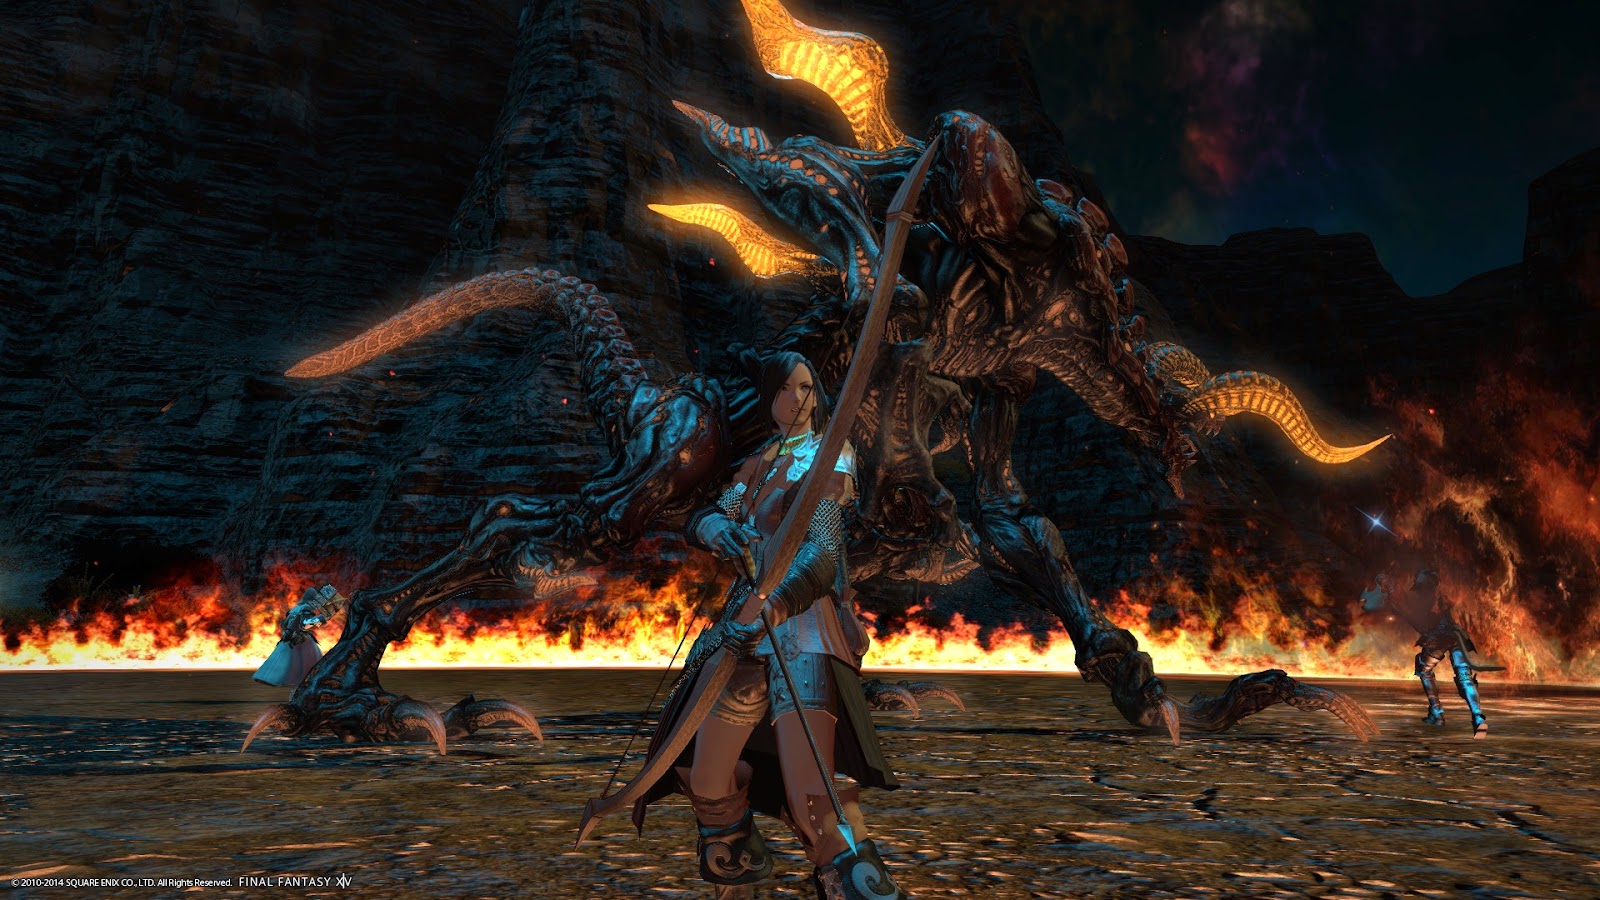 Final Fantasy XIV Is Getting Visual Updates with 7.0; No Plans for NFTs